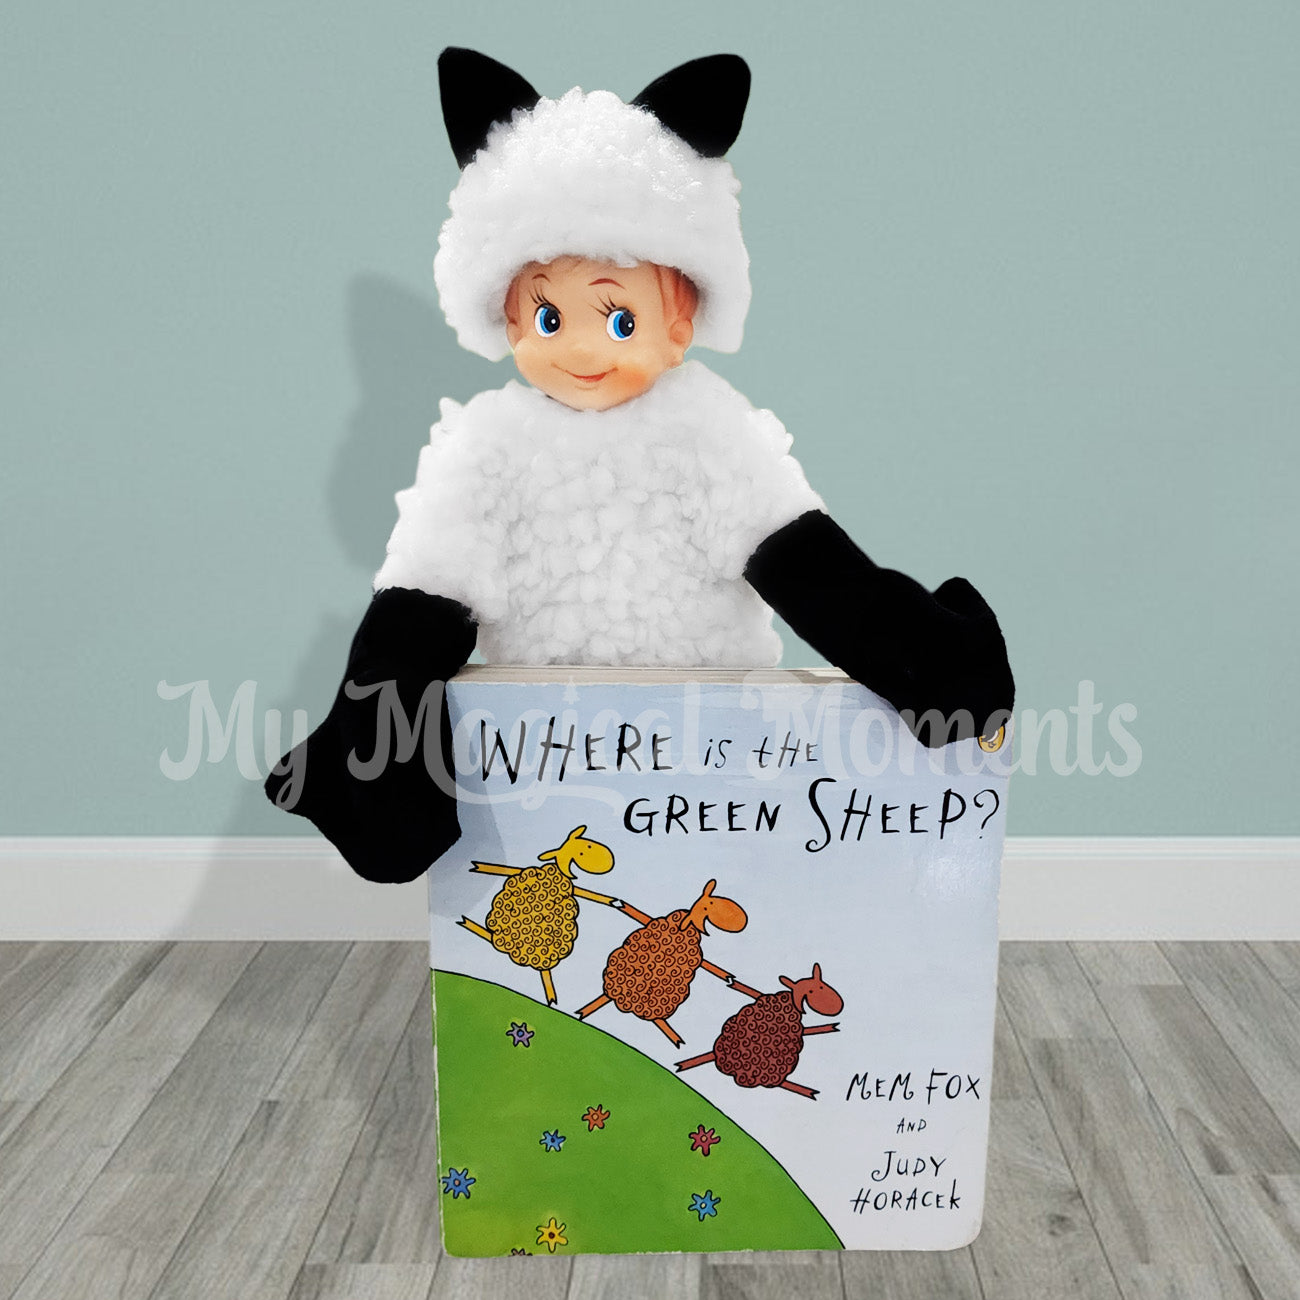 Sheep elf costume worn by 60s elf and where is the green sheep book